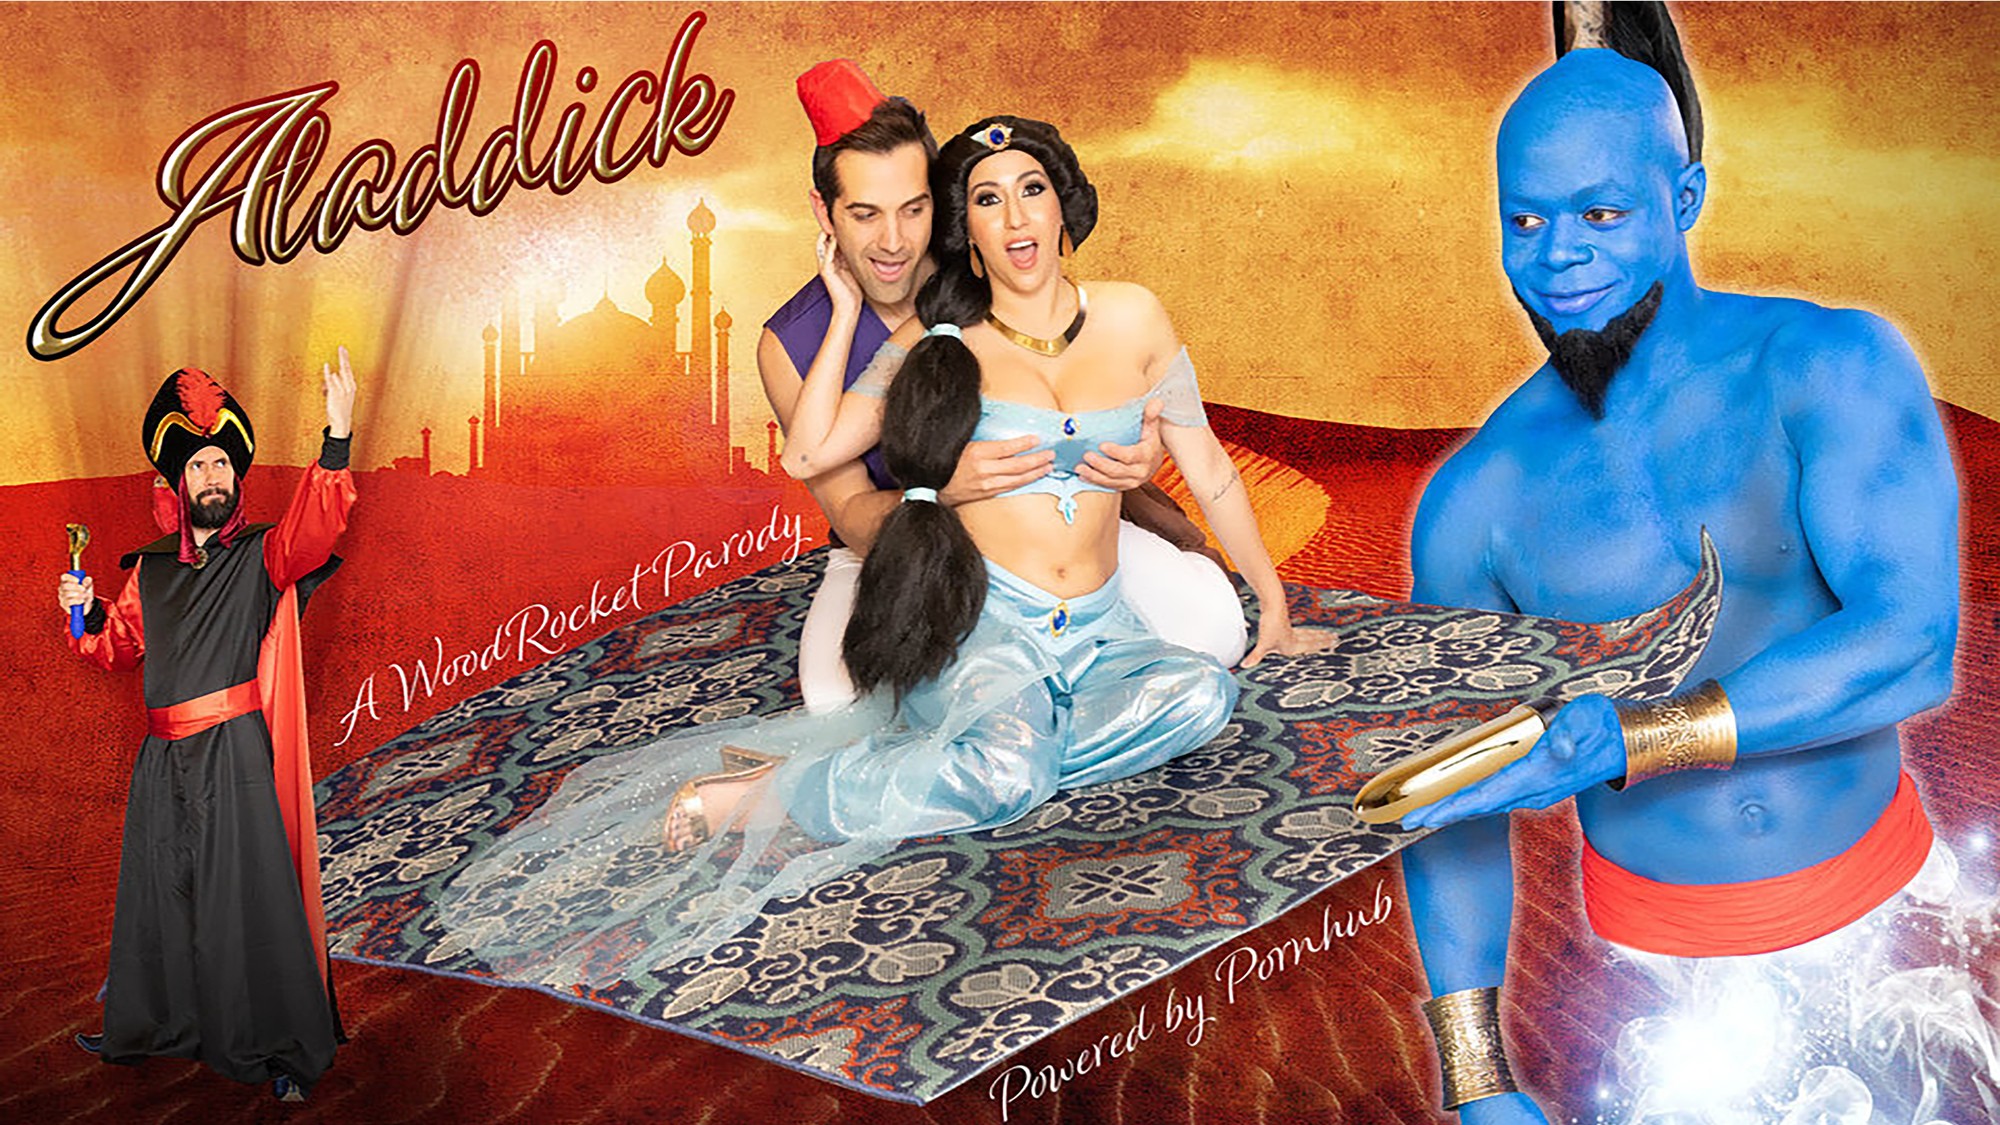 Porn Moving Funny Humor - The 'Aladdin' Porn Parody Is Here and We Fixed Its Title - VICE